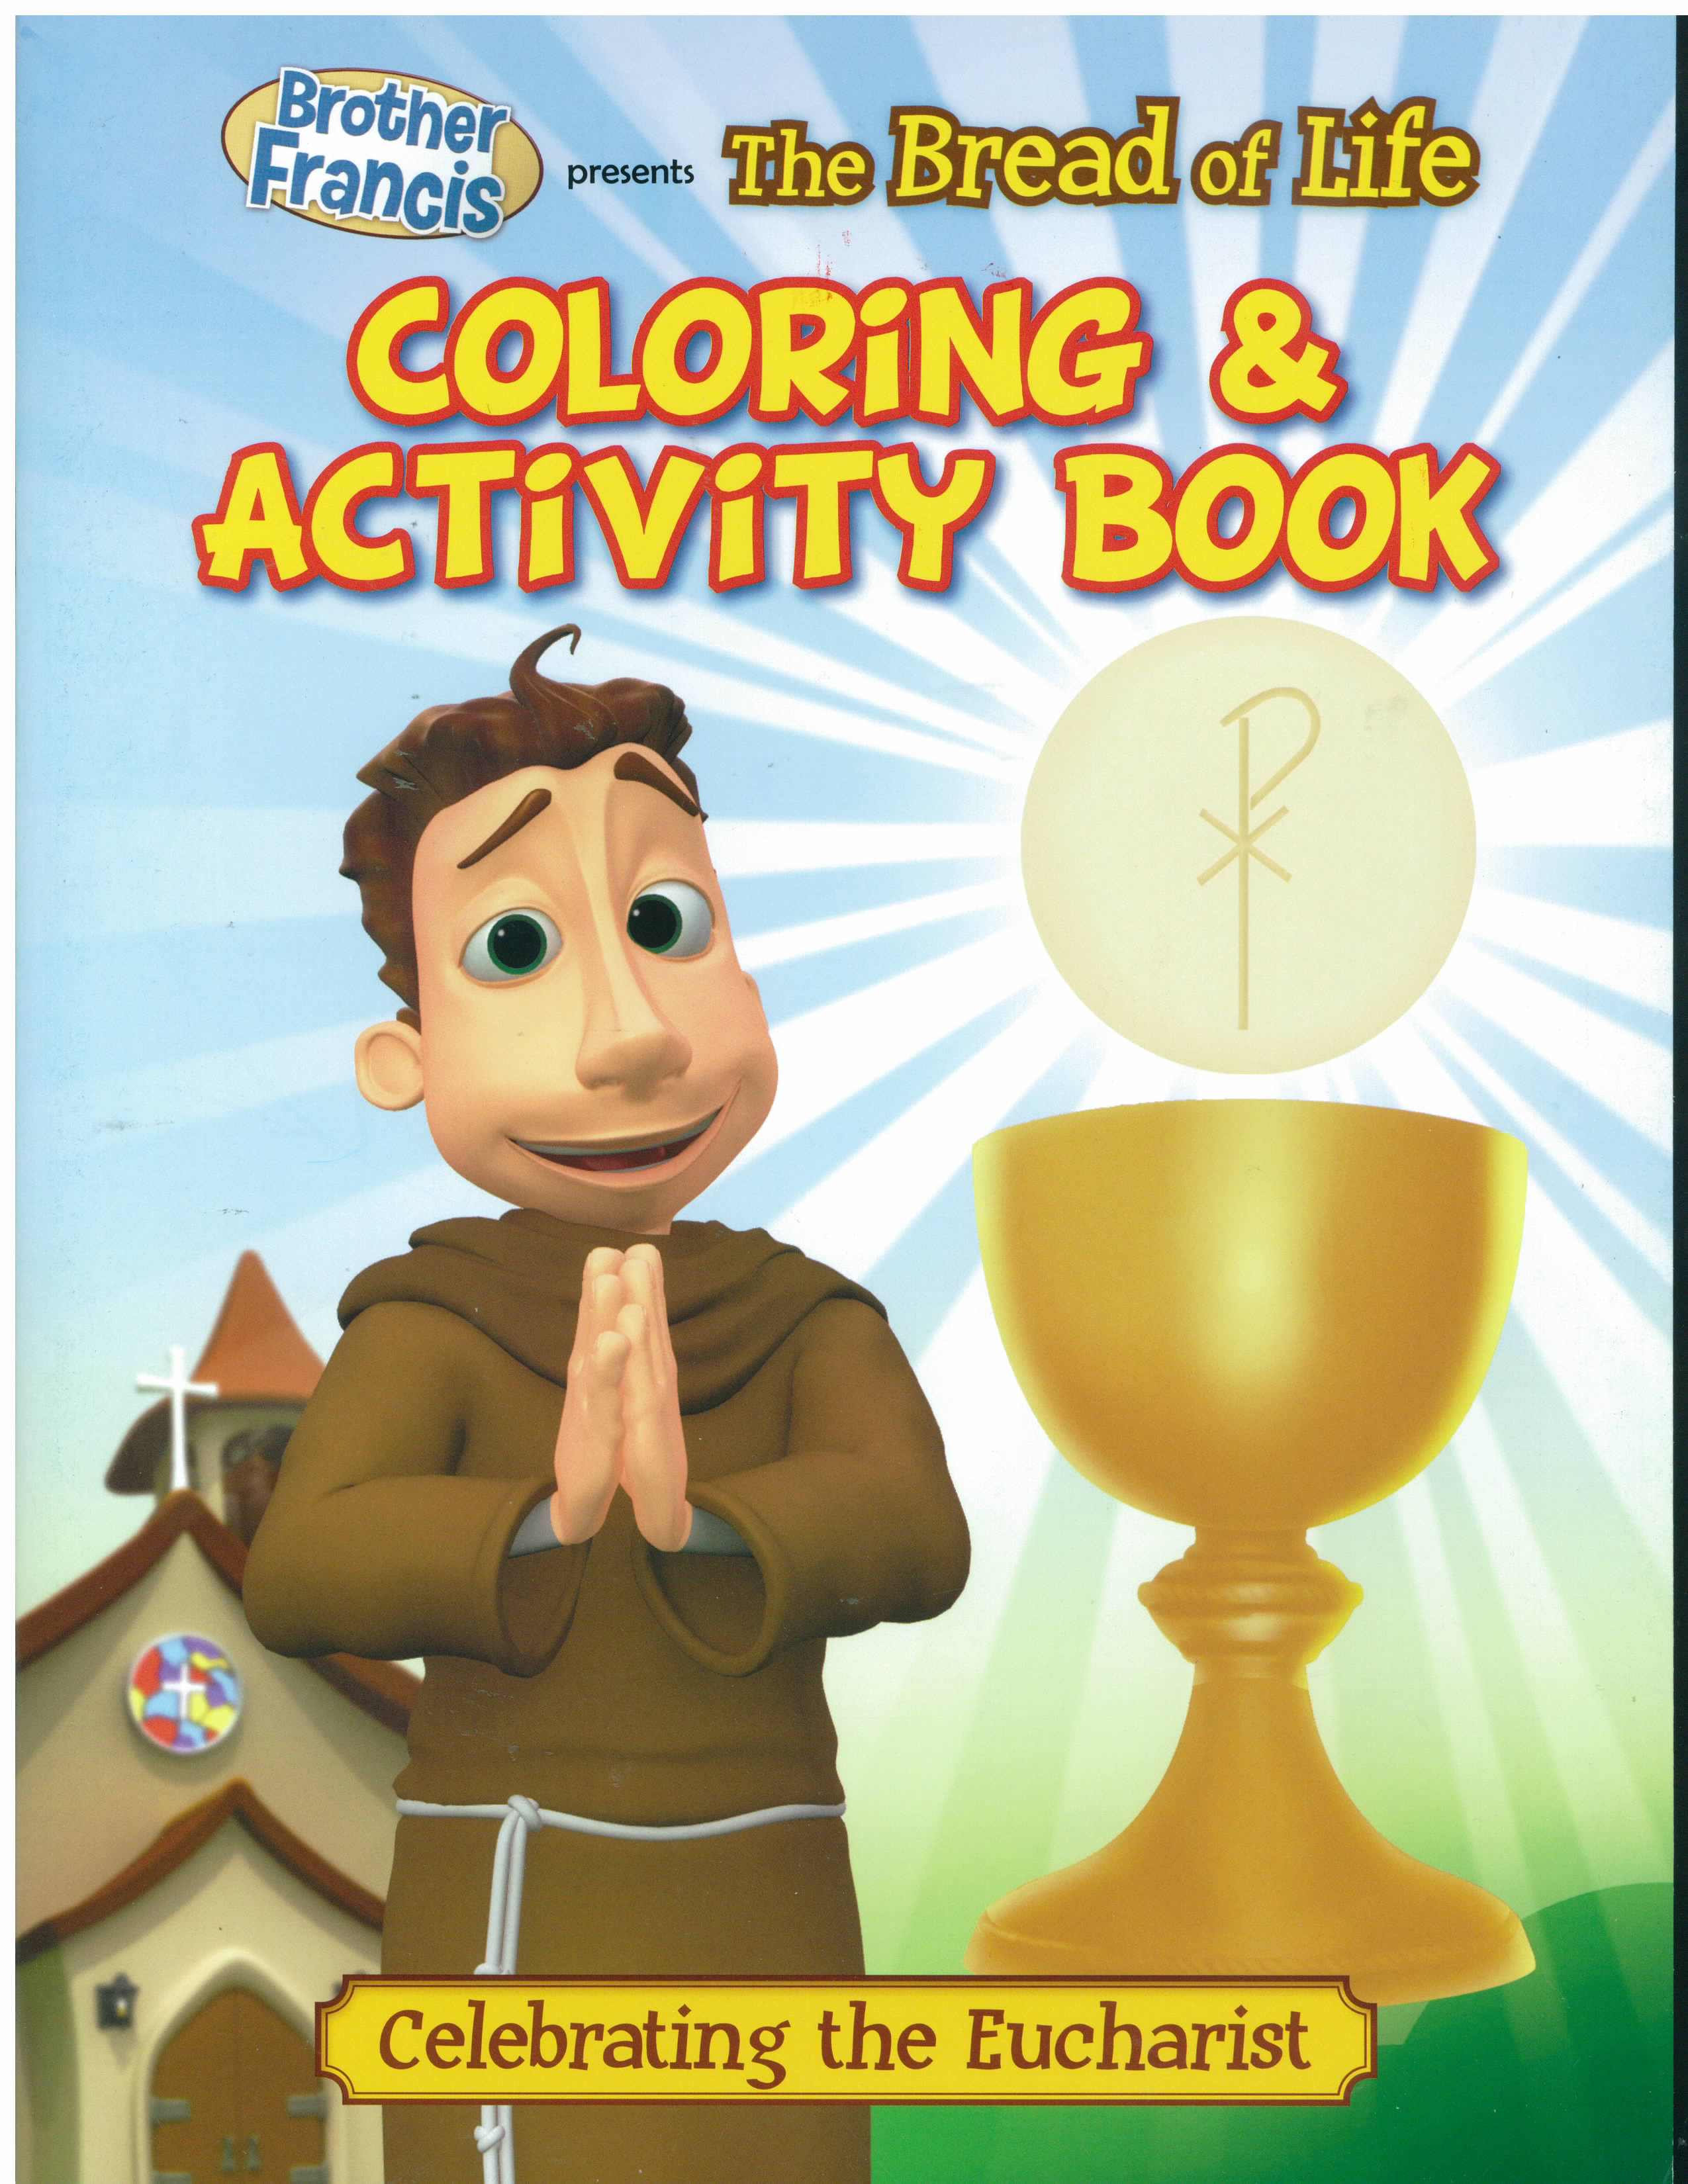 The Bread of Life Coloring Book-BF02-CB about celebrating the Eucharist